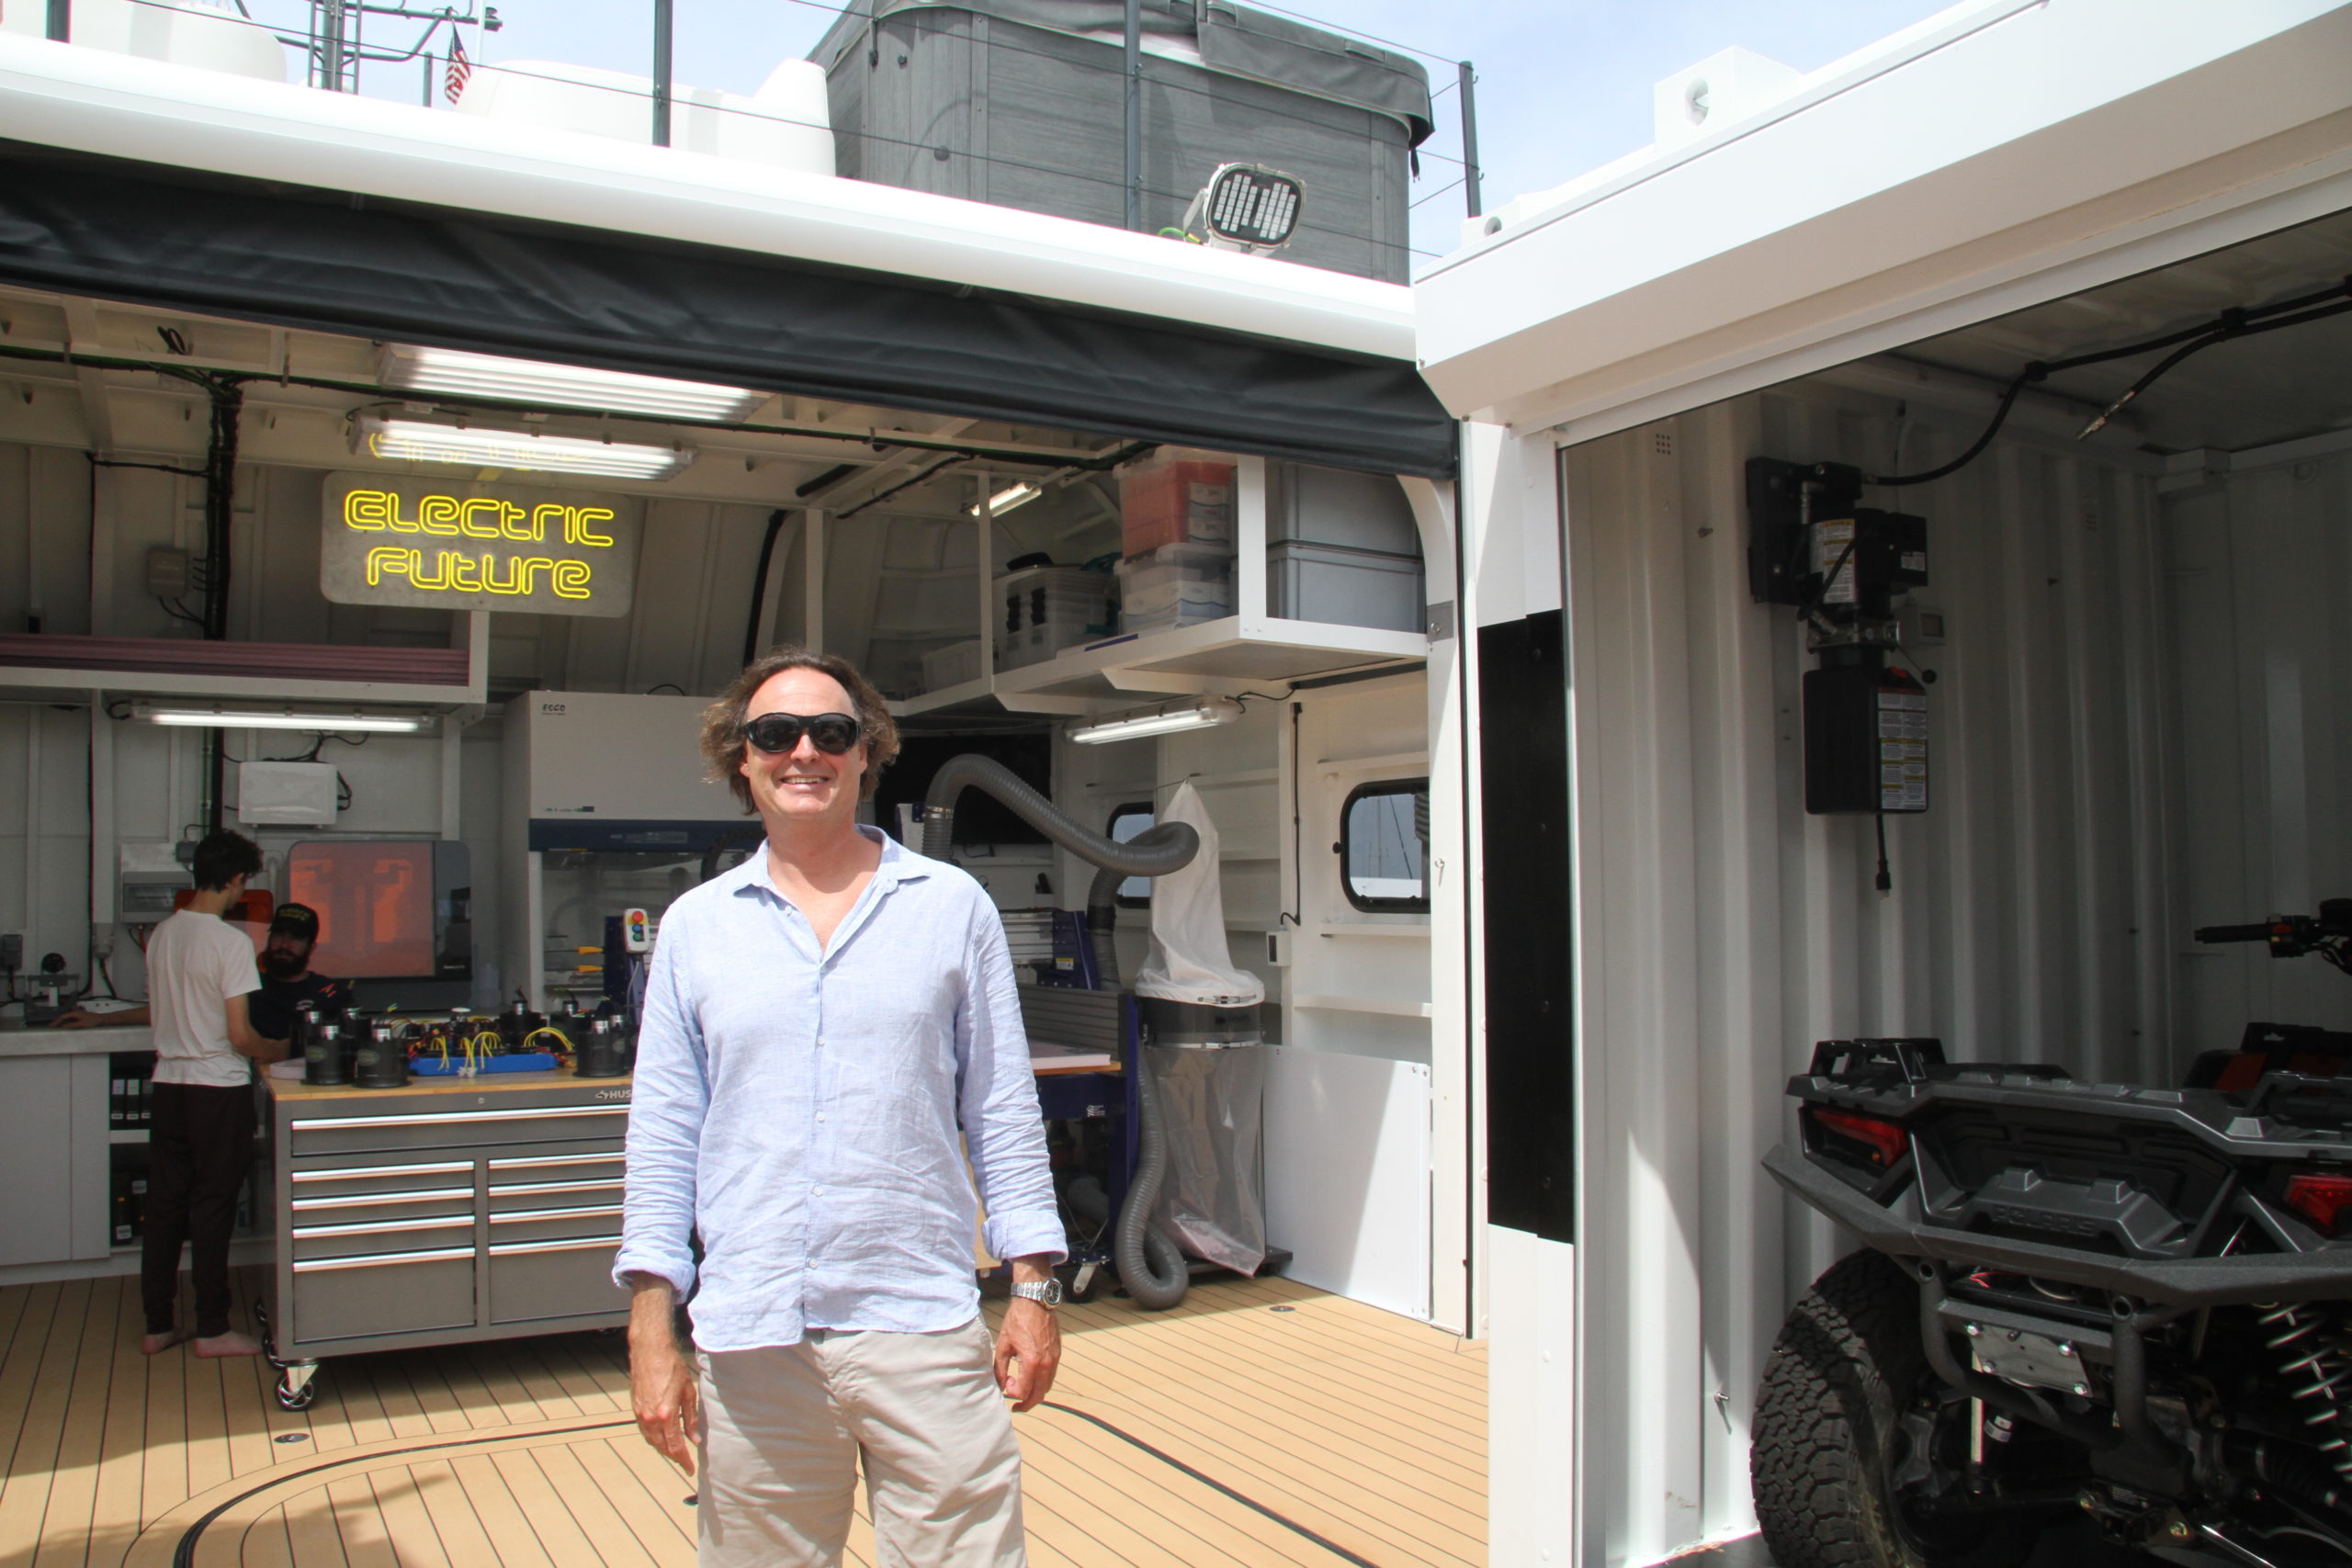 Jonathan Rothberg, owner of the Gene Chaser, said the 180-foot 